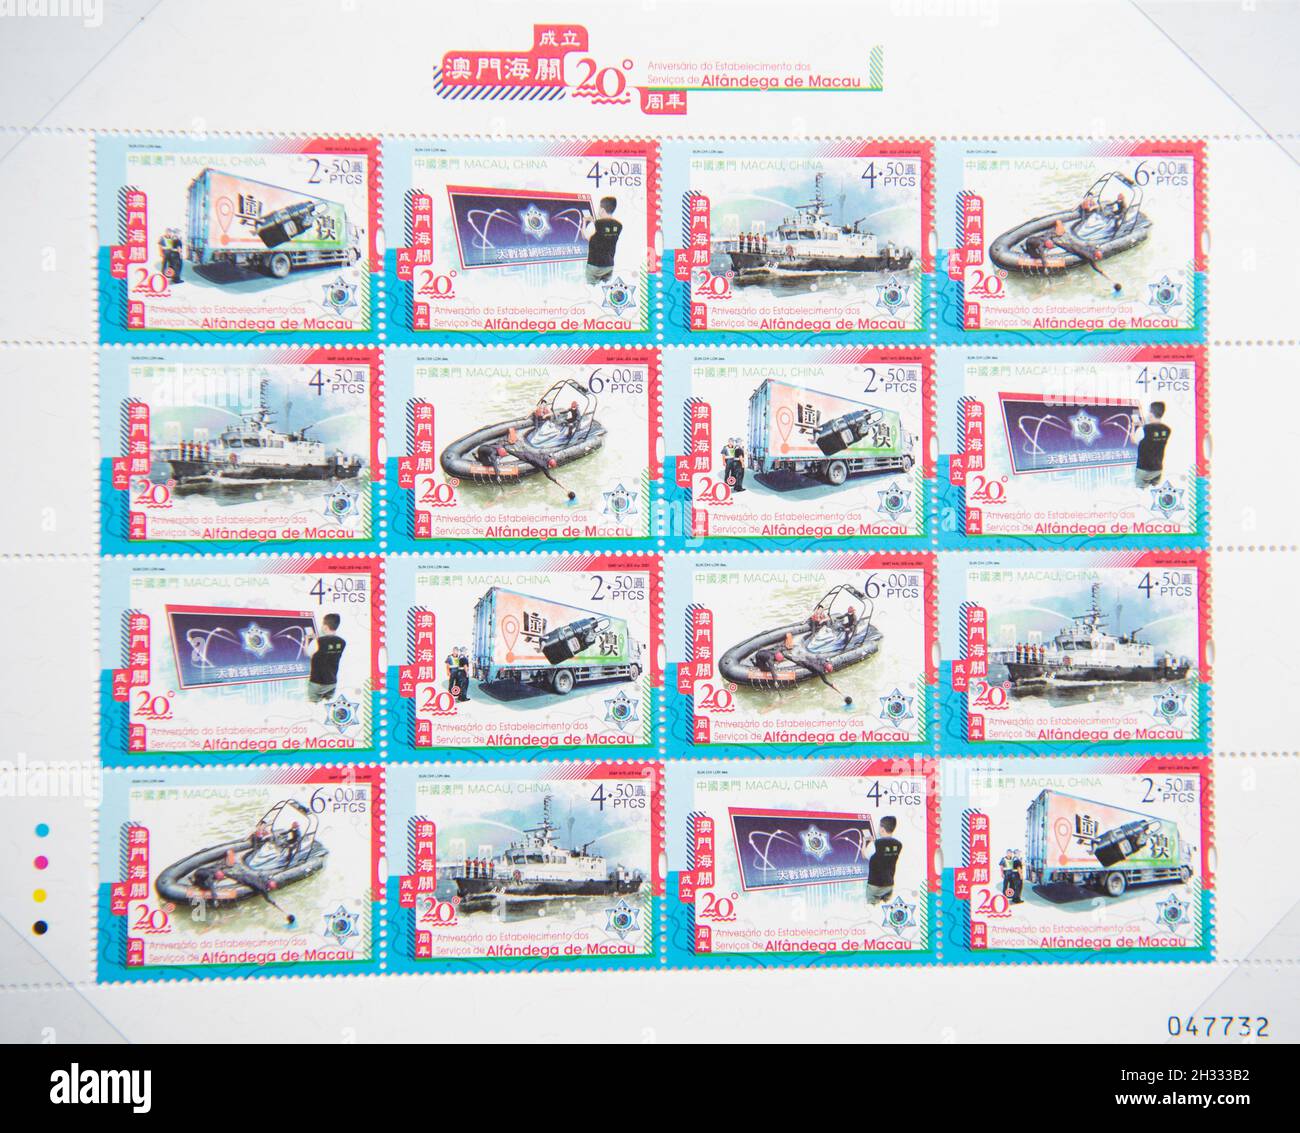 (211025) -- MACAO, Oct. 25, 2021 (Xinhua) -- Photo taken on Oct. 25, 2021 shows the special stamps to mark the 20th anniversary of Macao Customs Service, in south China's Macao. The Macao Post would issue souvenir stamps to mark the 150th anniversary of the Kiang Wu Hospital Charitable Association on Oct. 28, the 20th anniversary of the Unitary Police Service on Oct. 29 and the 20th anniversary of Macao Customs Service on Nov. 1. (Xinhua/Cheong Kam Ka) Stock Photo